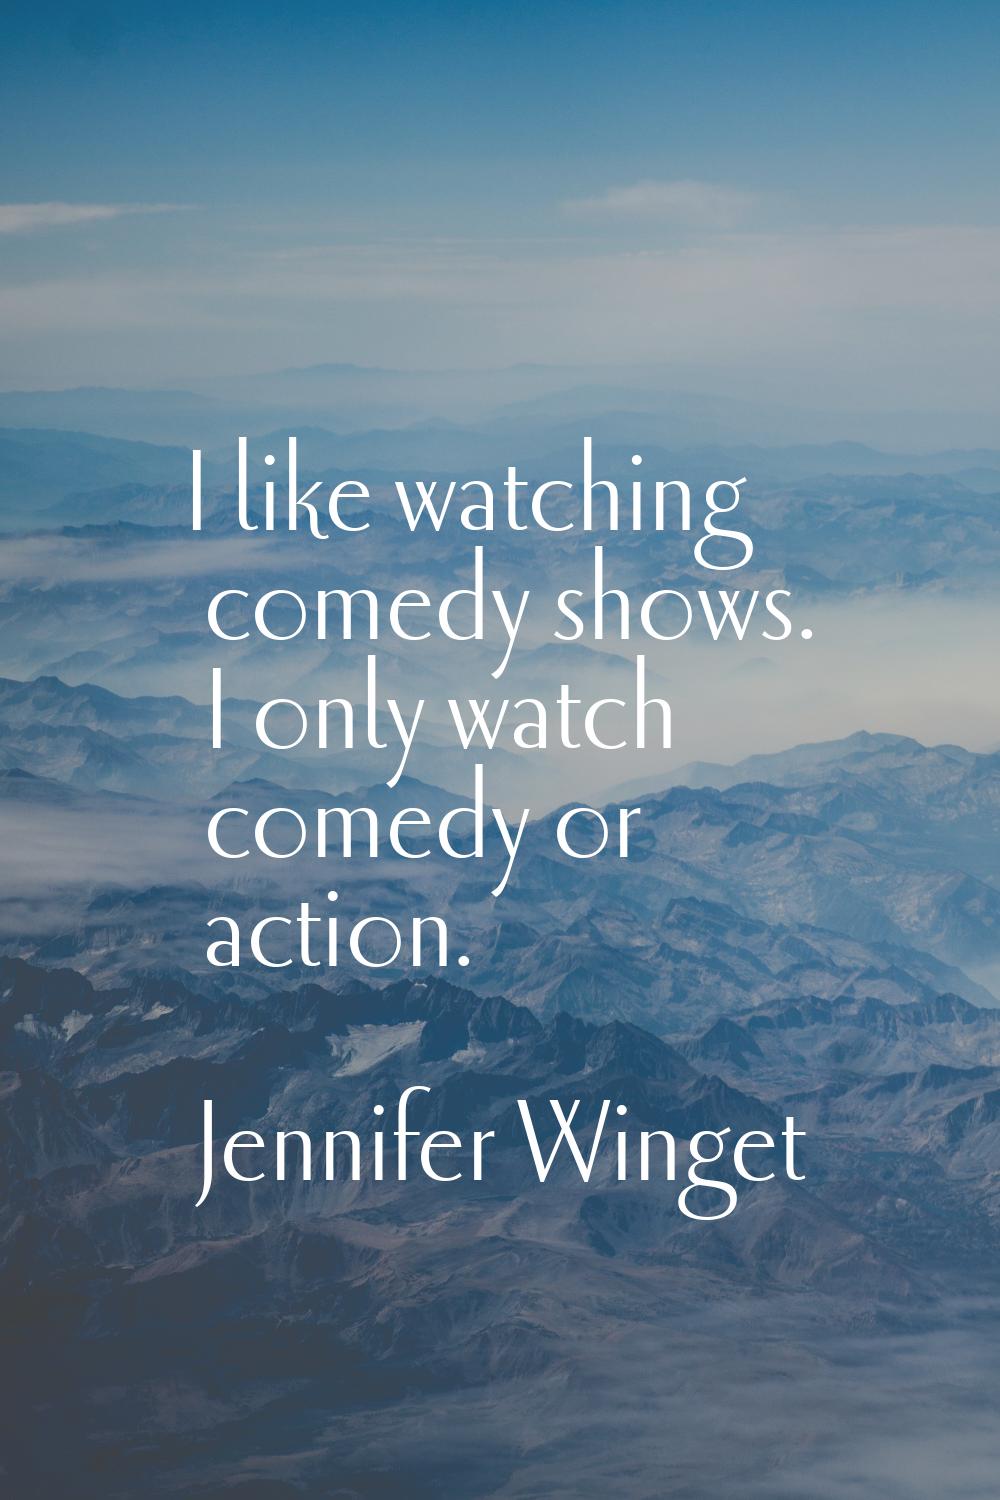 I like watching comedy shows. I only watch comedy or action.